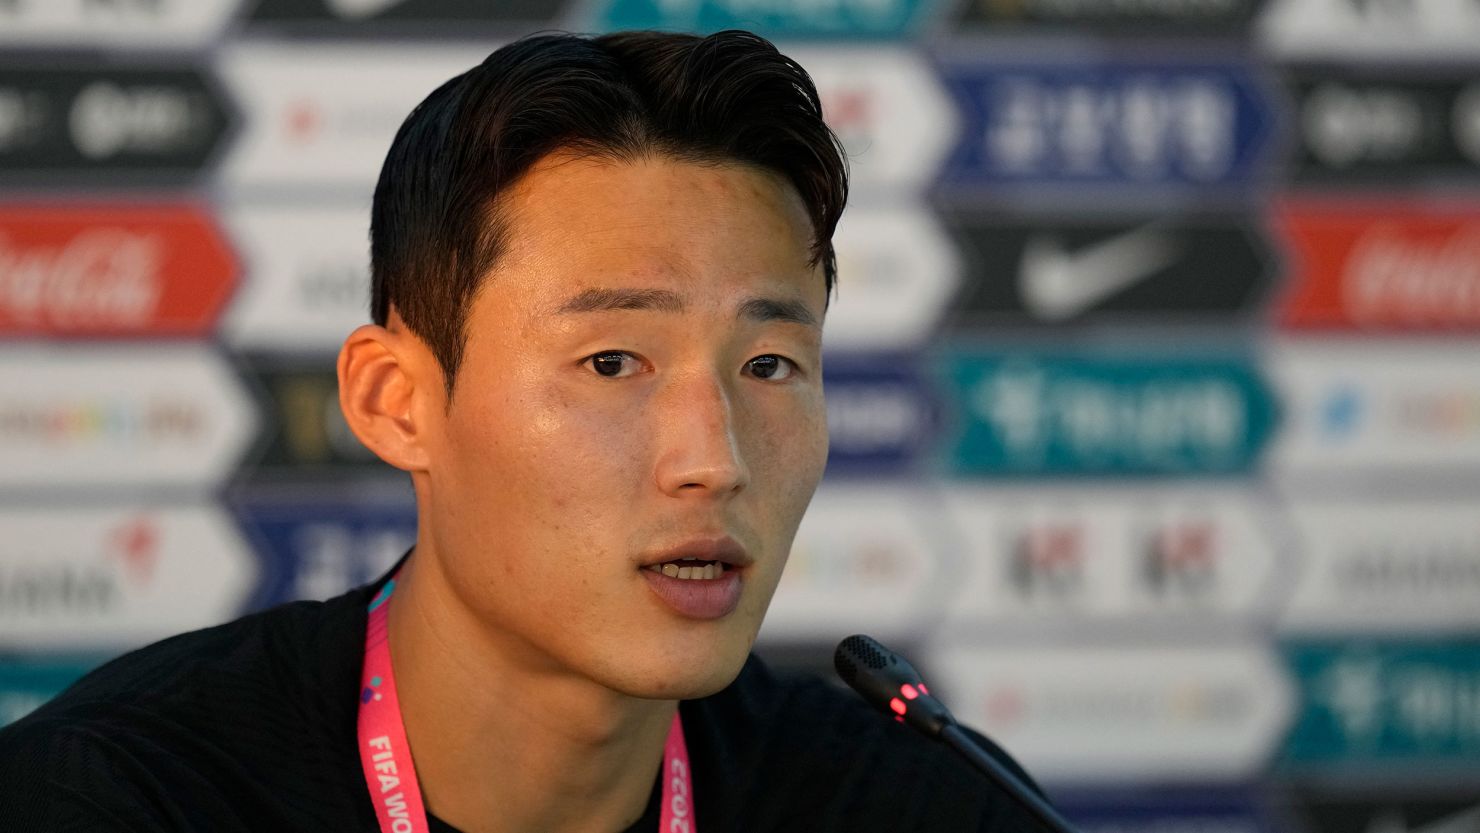 Son speaks at a press conference during the 2022 FIFA World Cup in Qatar.